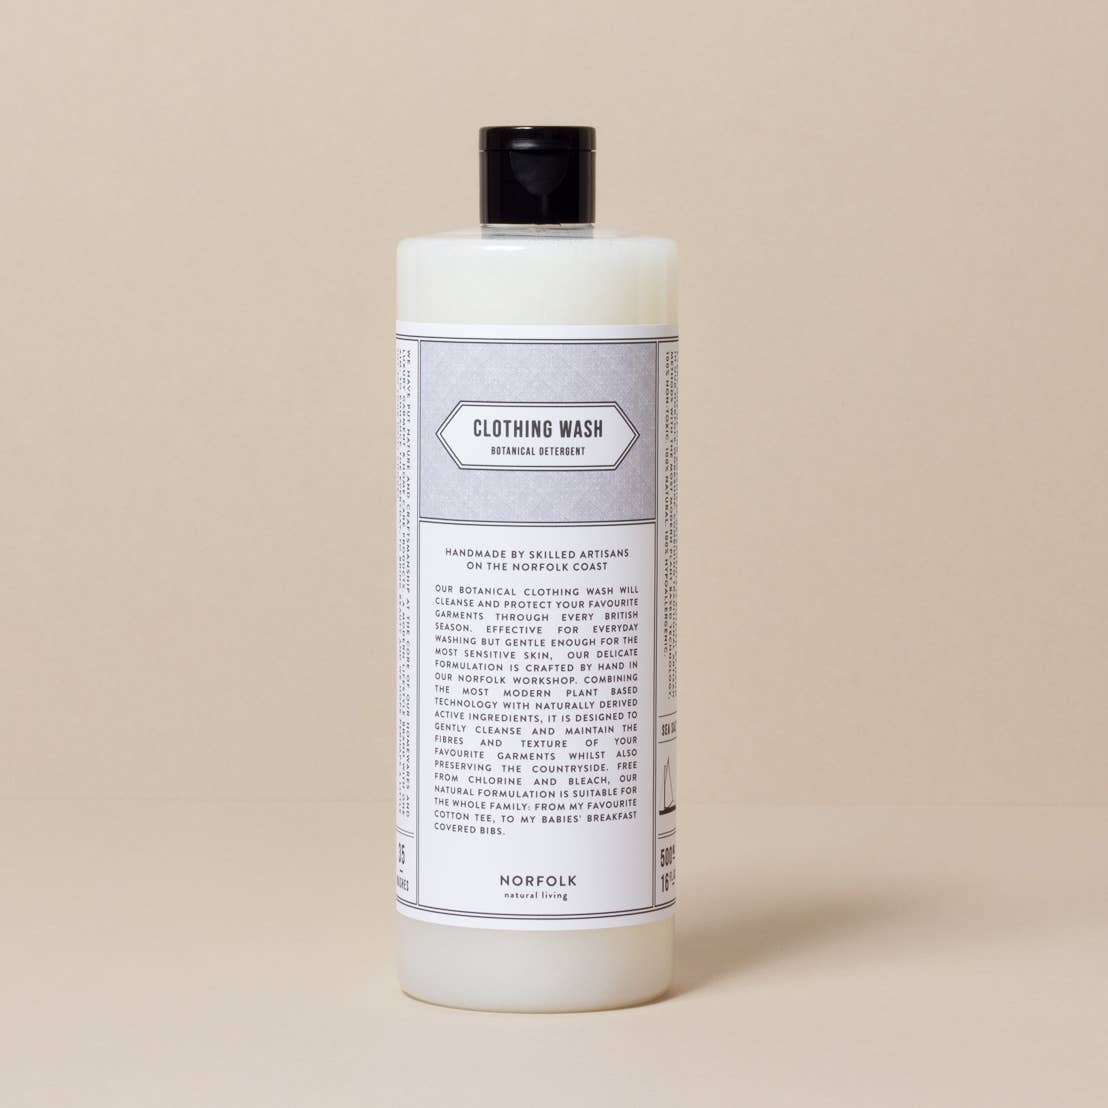 A white bottle of Norfolk Natural Living Coastal laundry detergent sits against a tan background. The label, in elegant typography, includes detailed text about the product.